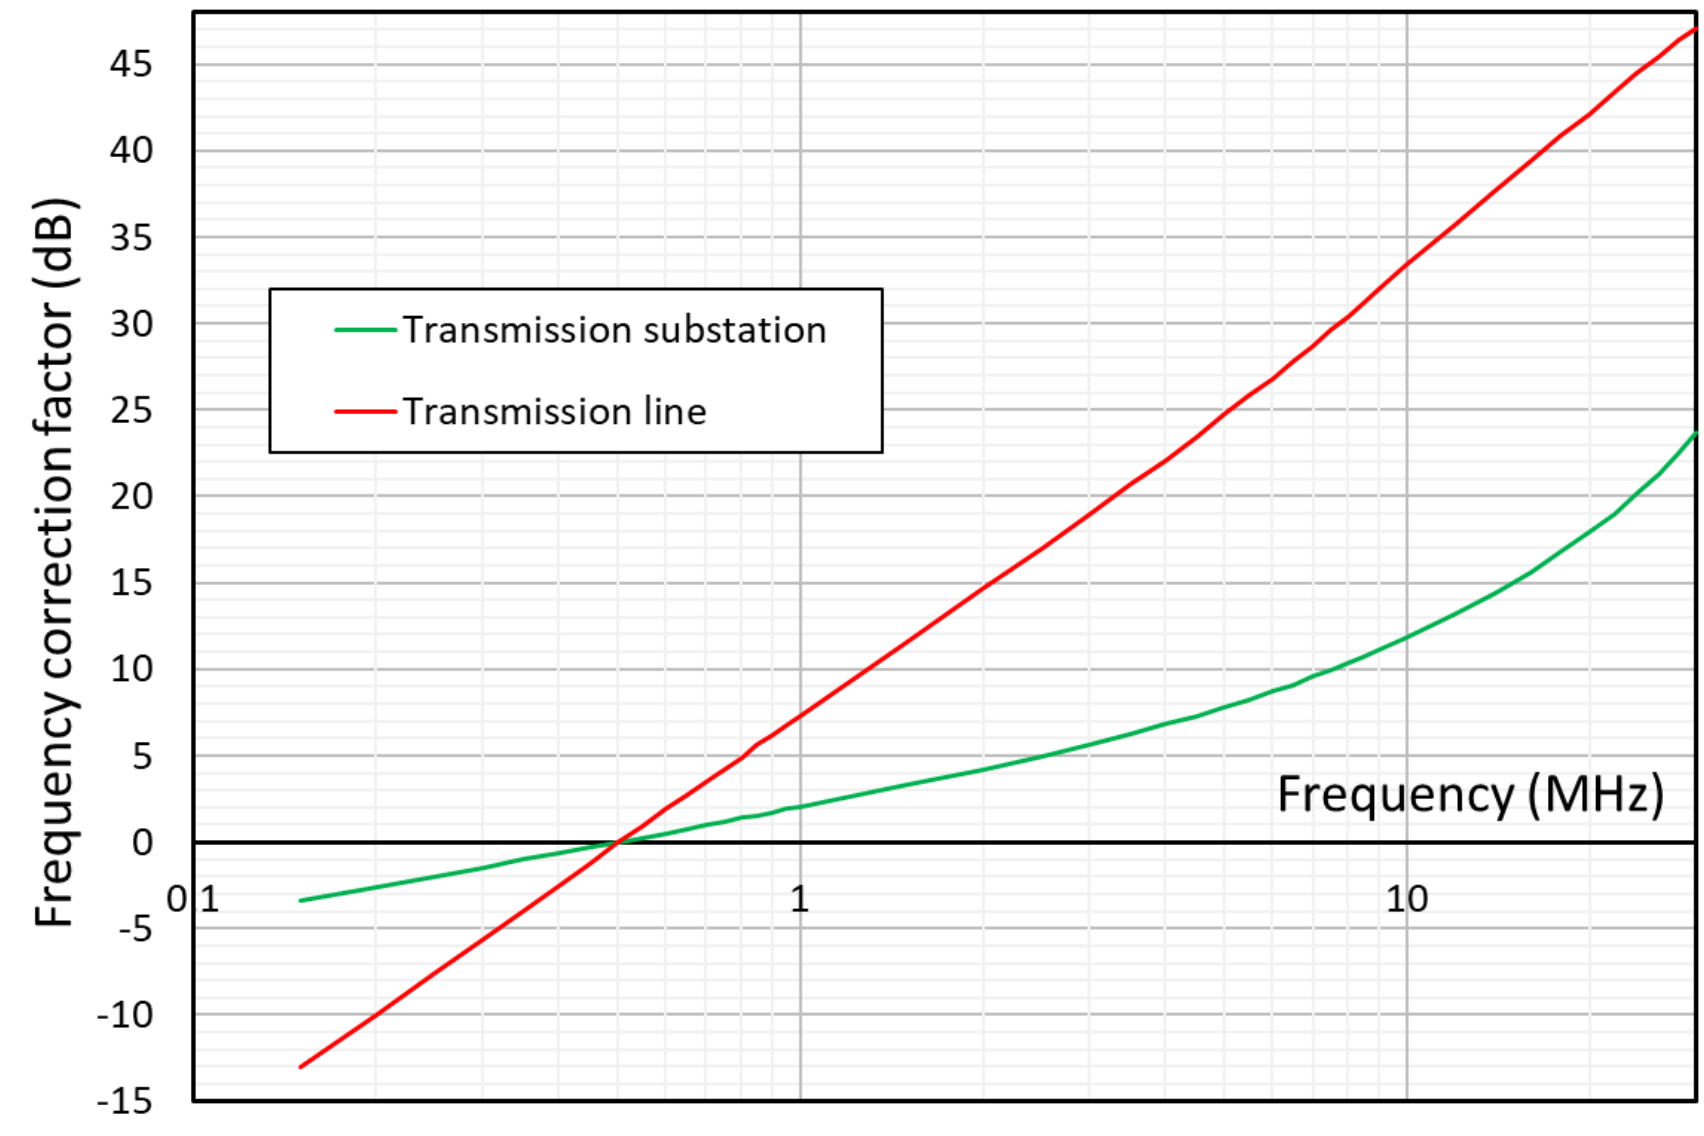 Figure B2: Correction factor for frequencies other than 500 kHz  (the long description is located below the             image)